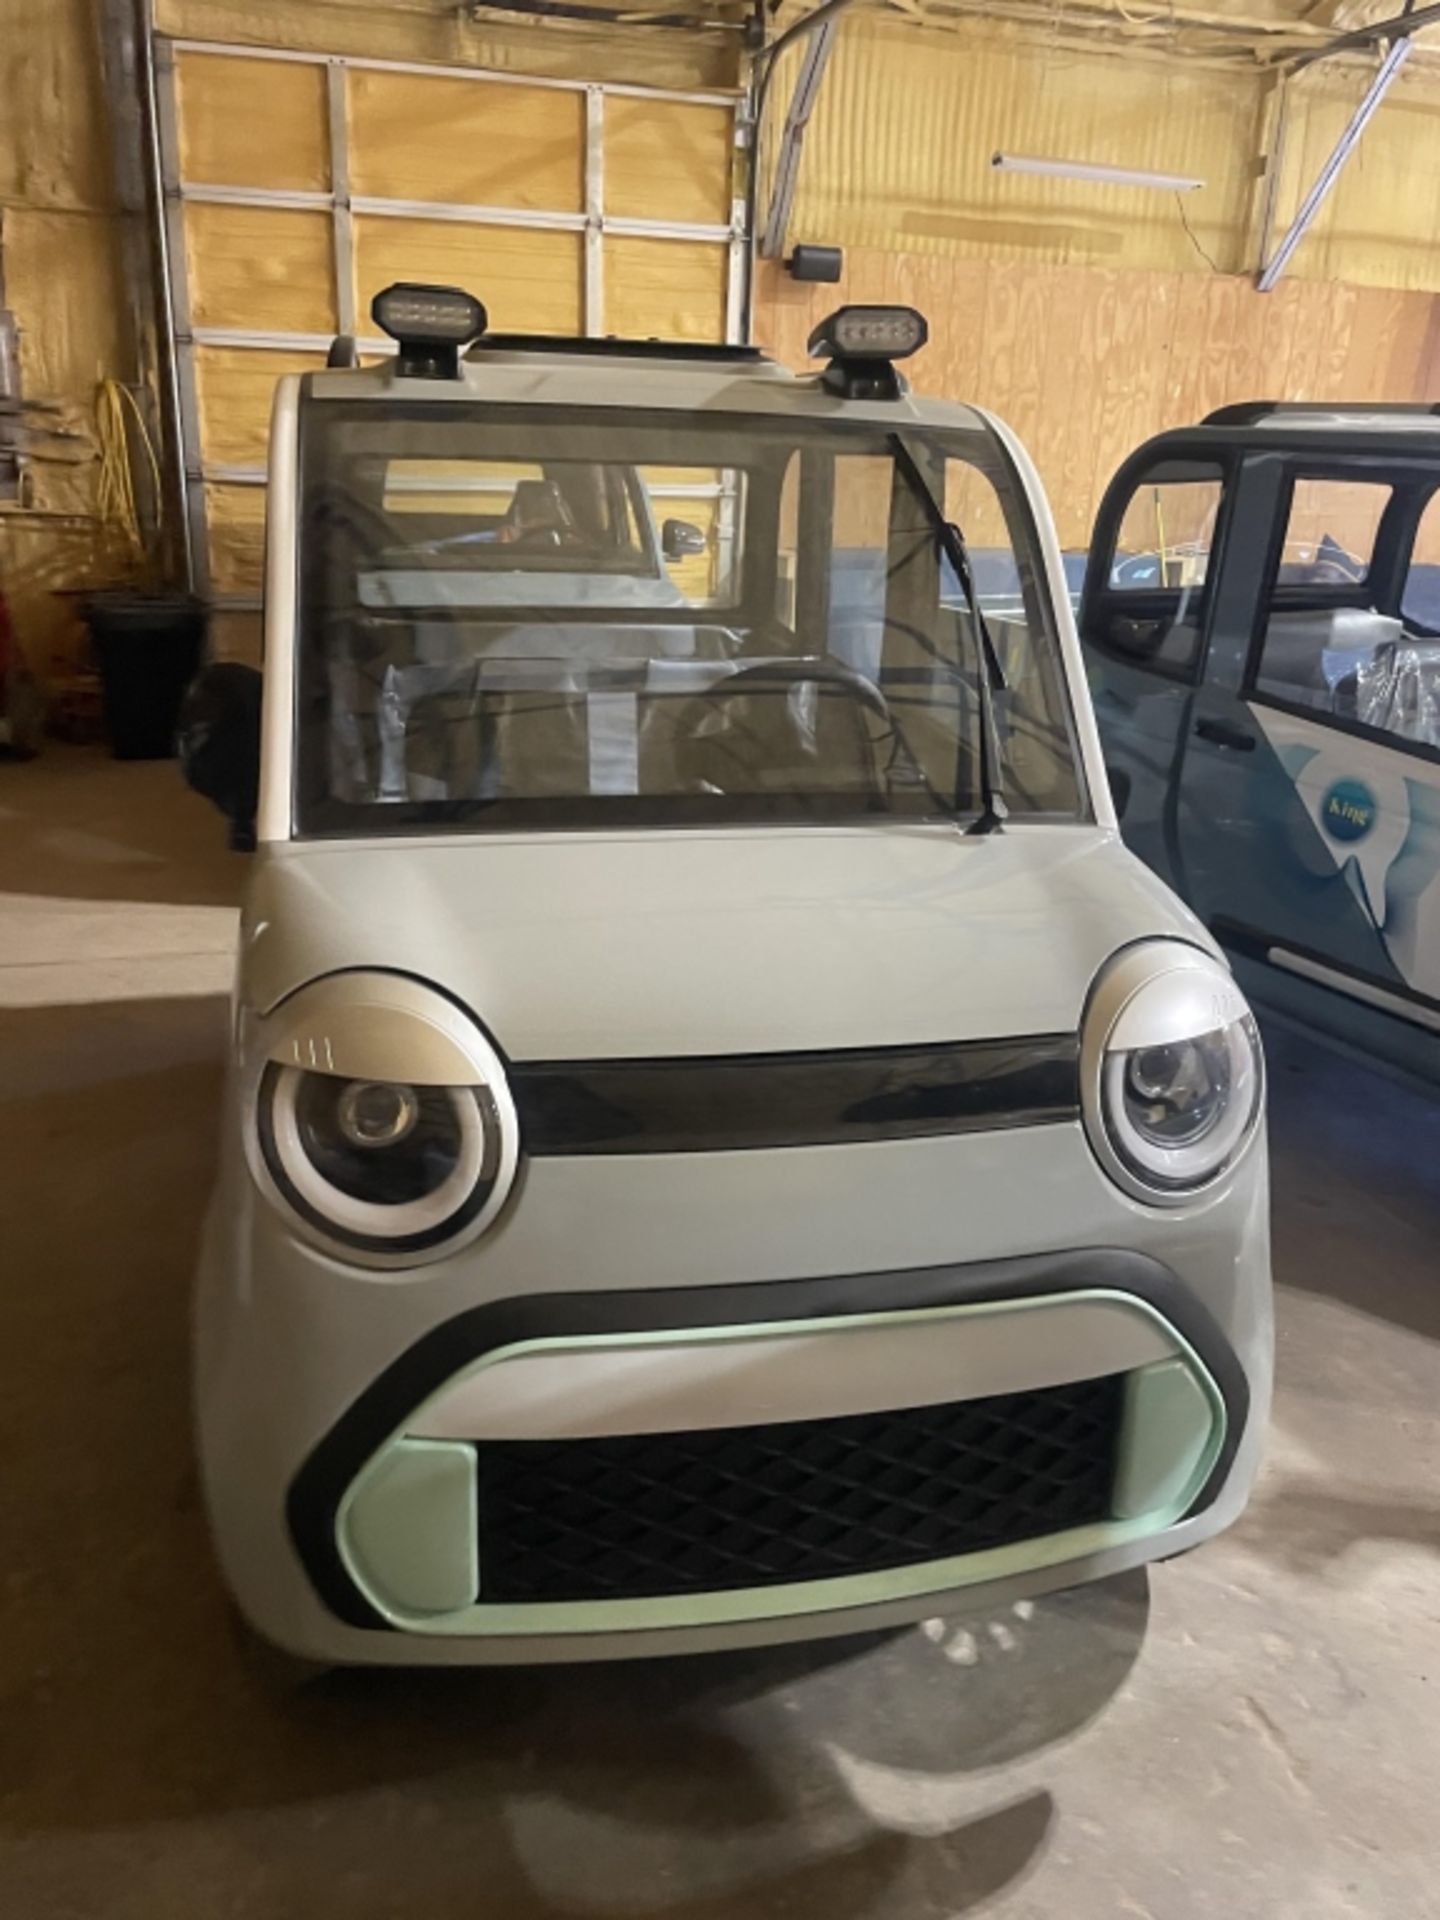 MECO M-F Electric Vehicle - Image 13 of 30